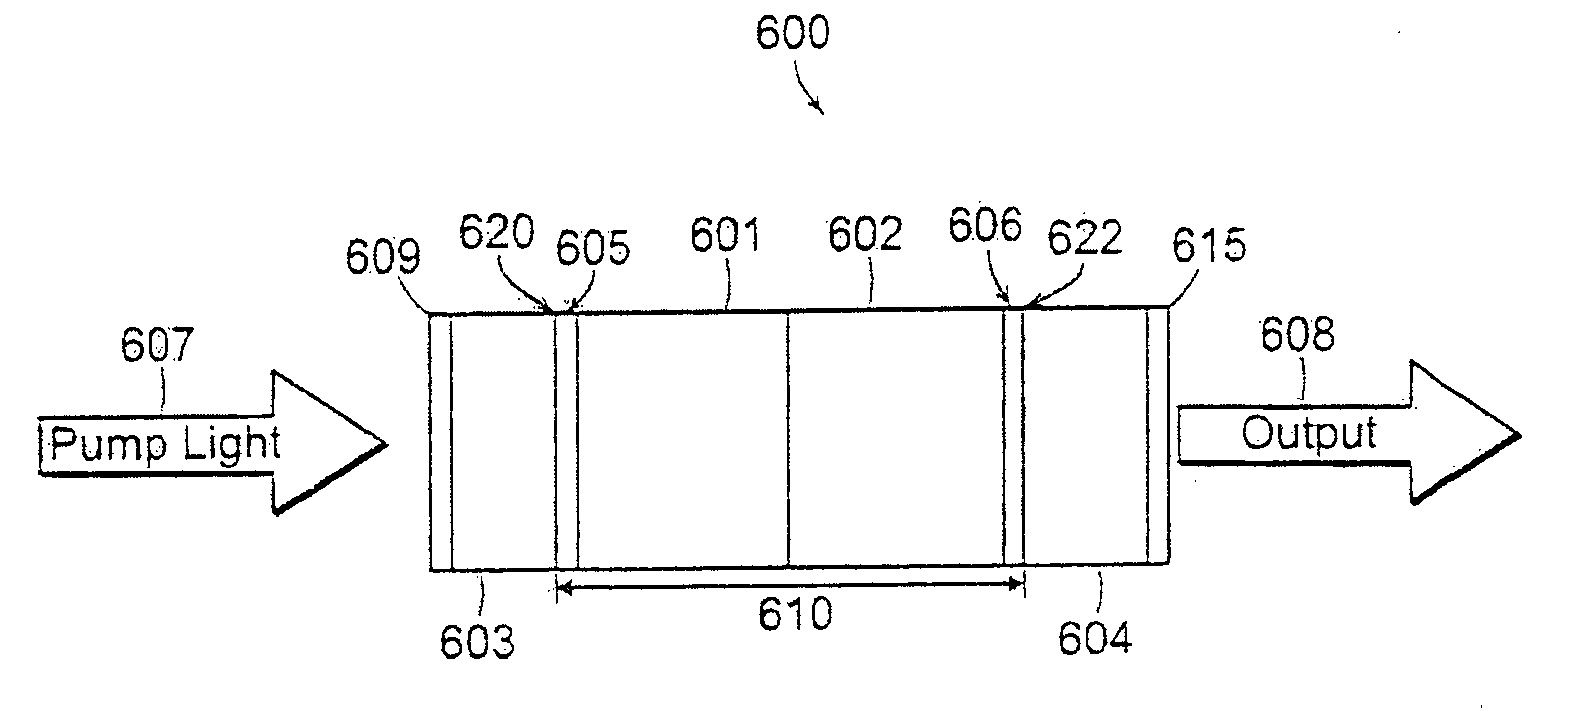 Q-switched microlaser apparatus and method for use